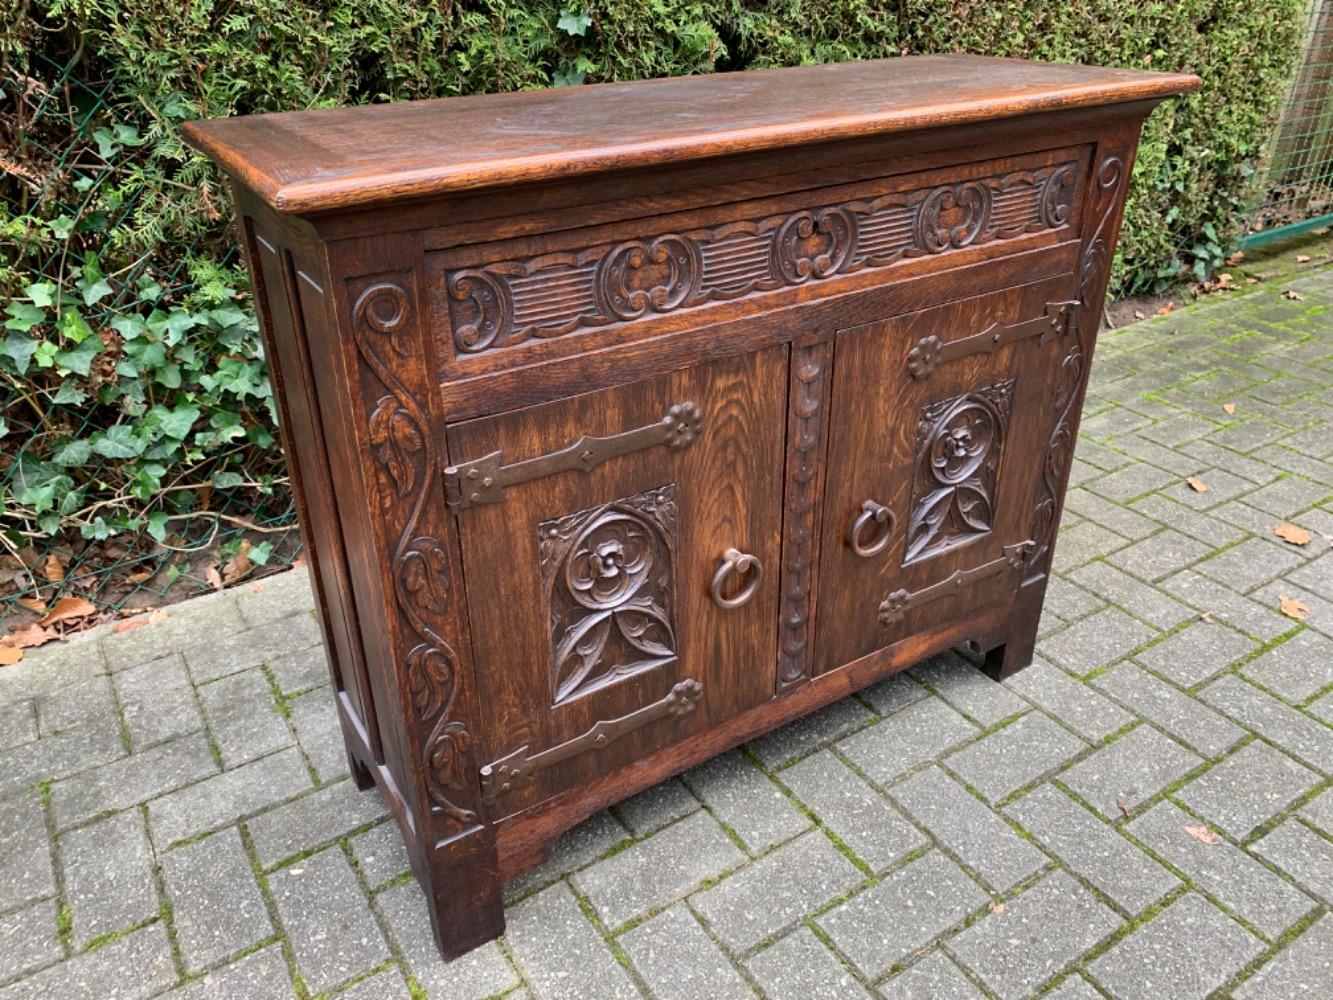 Gothic style Cabinet